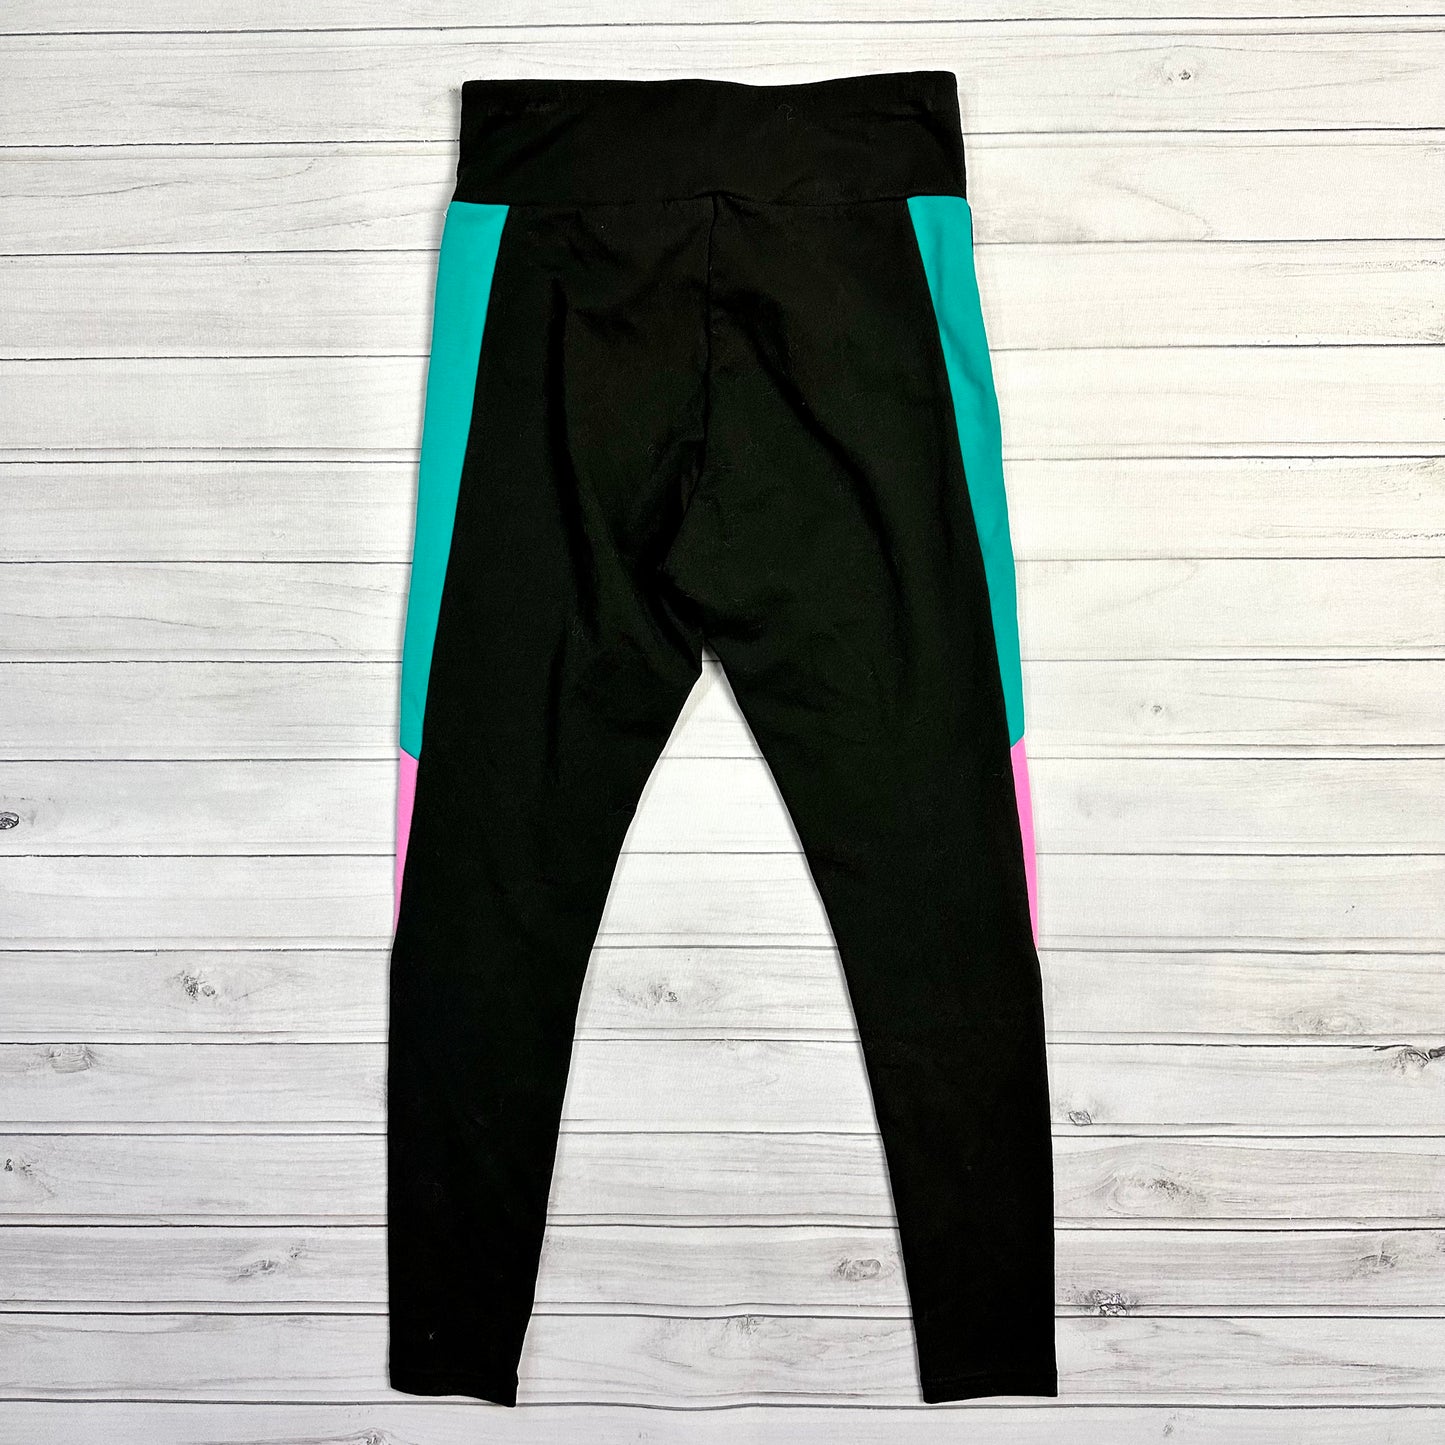 Athletic Leggings By Puma  Size: S